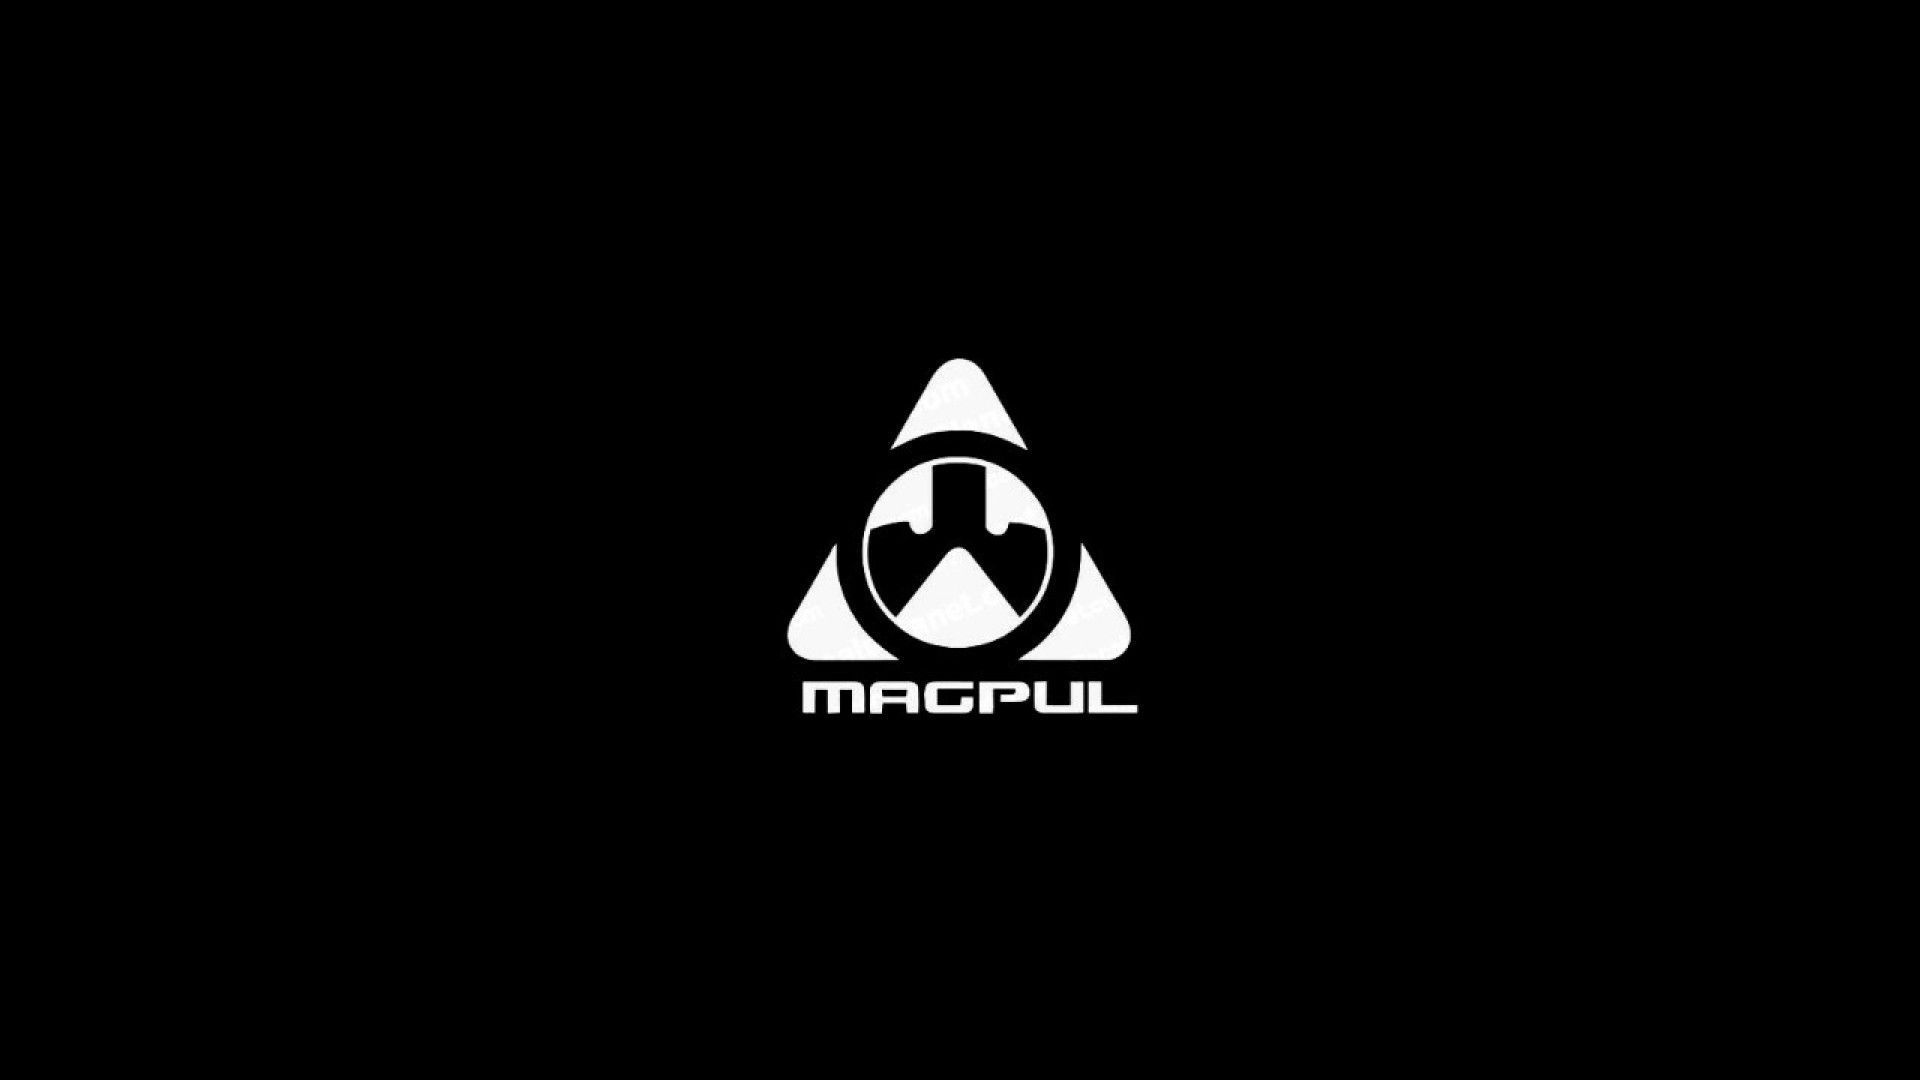 Magpul Backgrounds